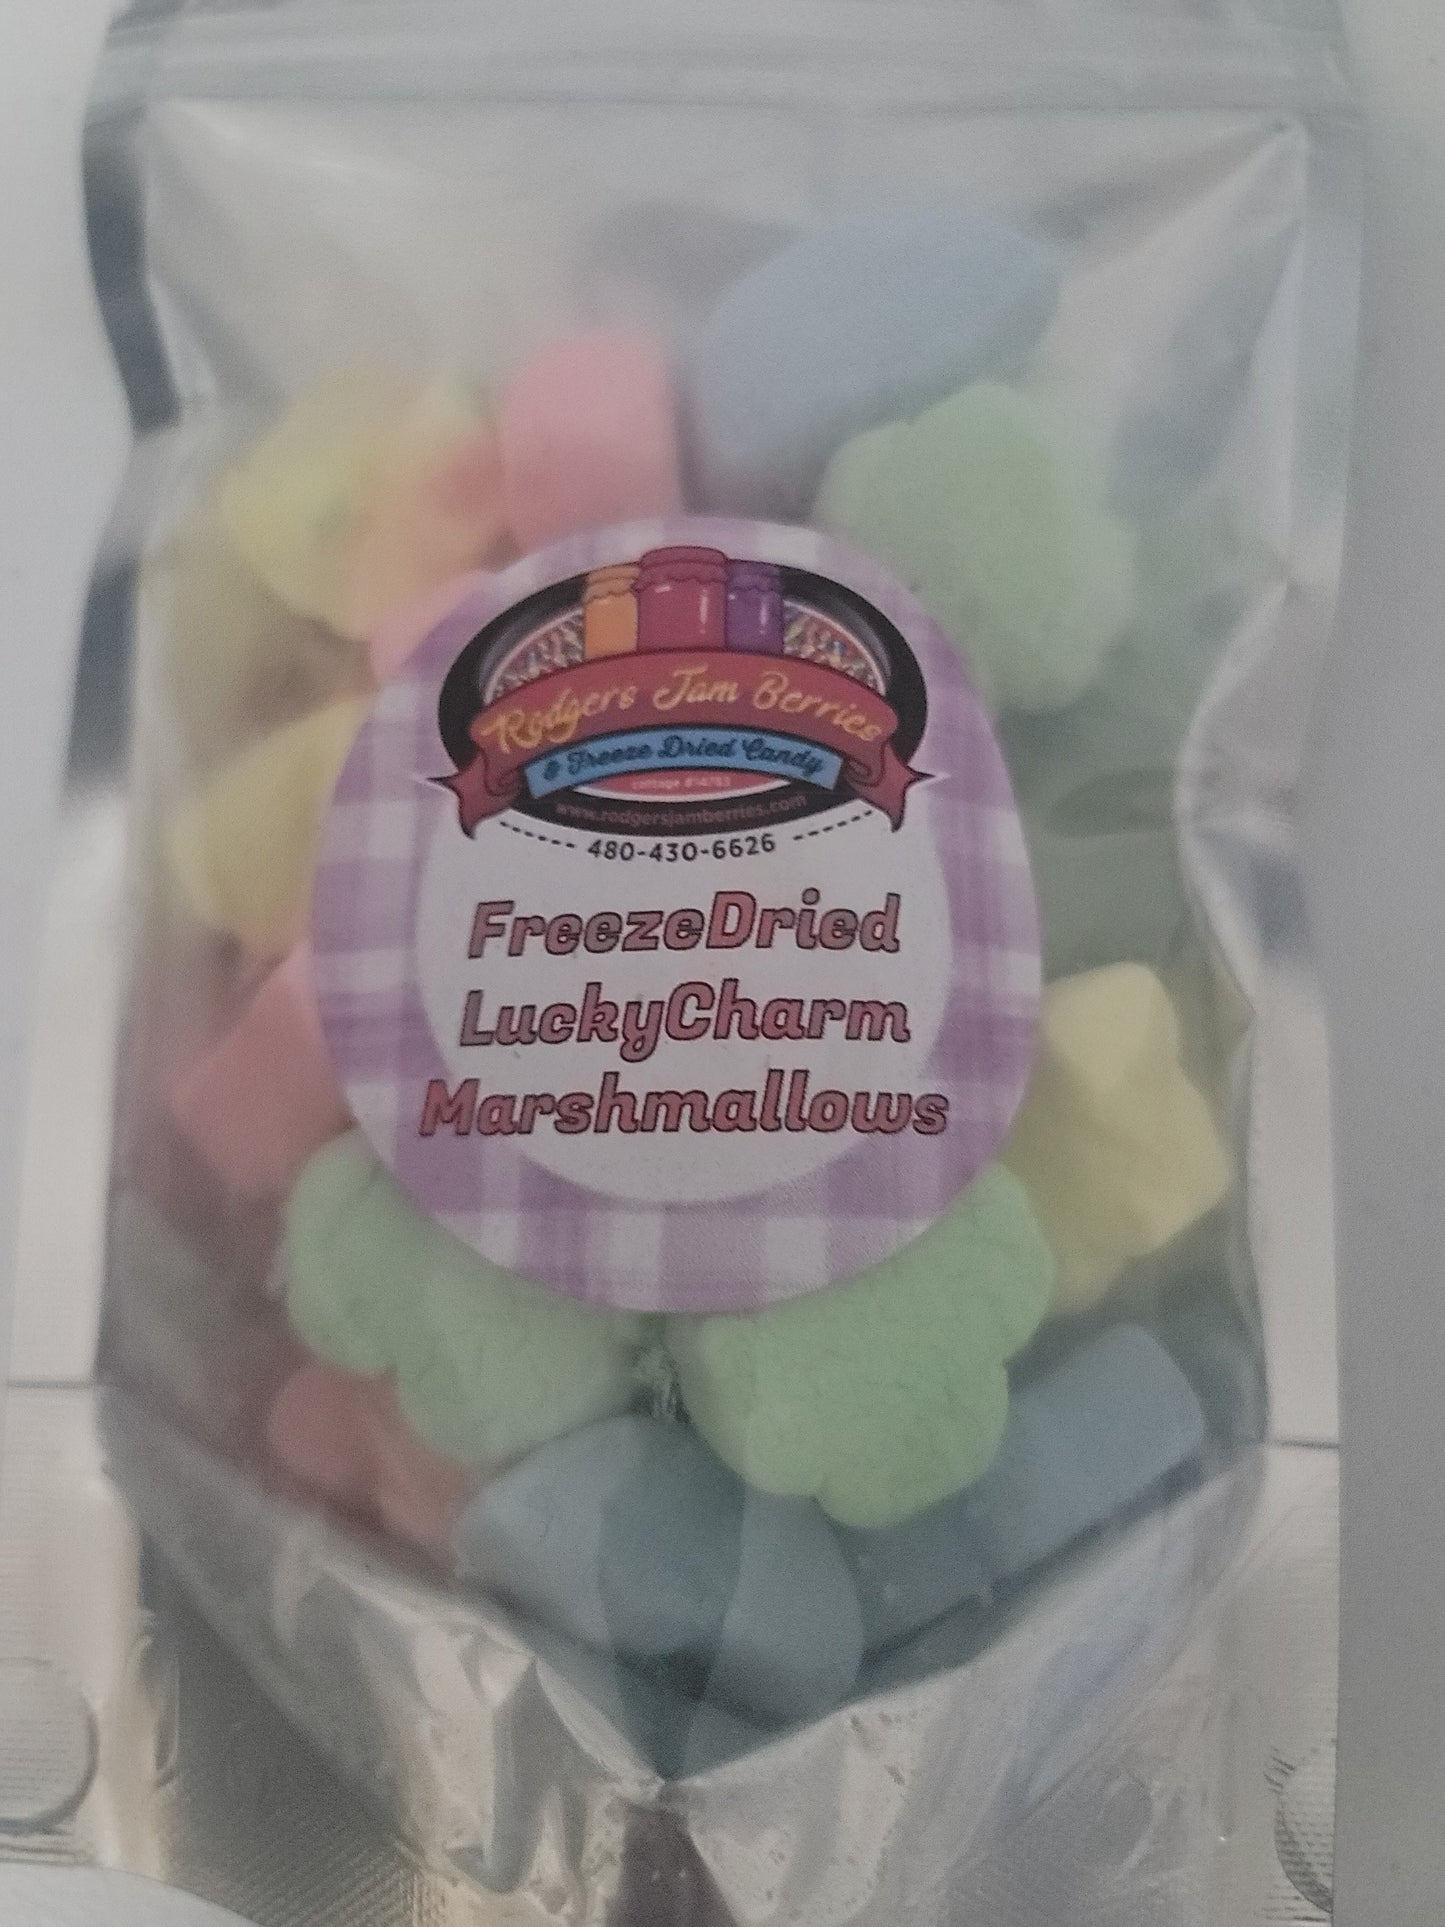 Rodgers jam berries  - Freeze Dried Marshmallows